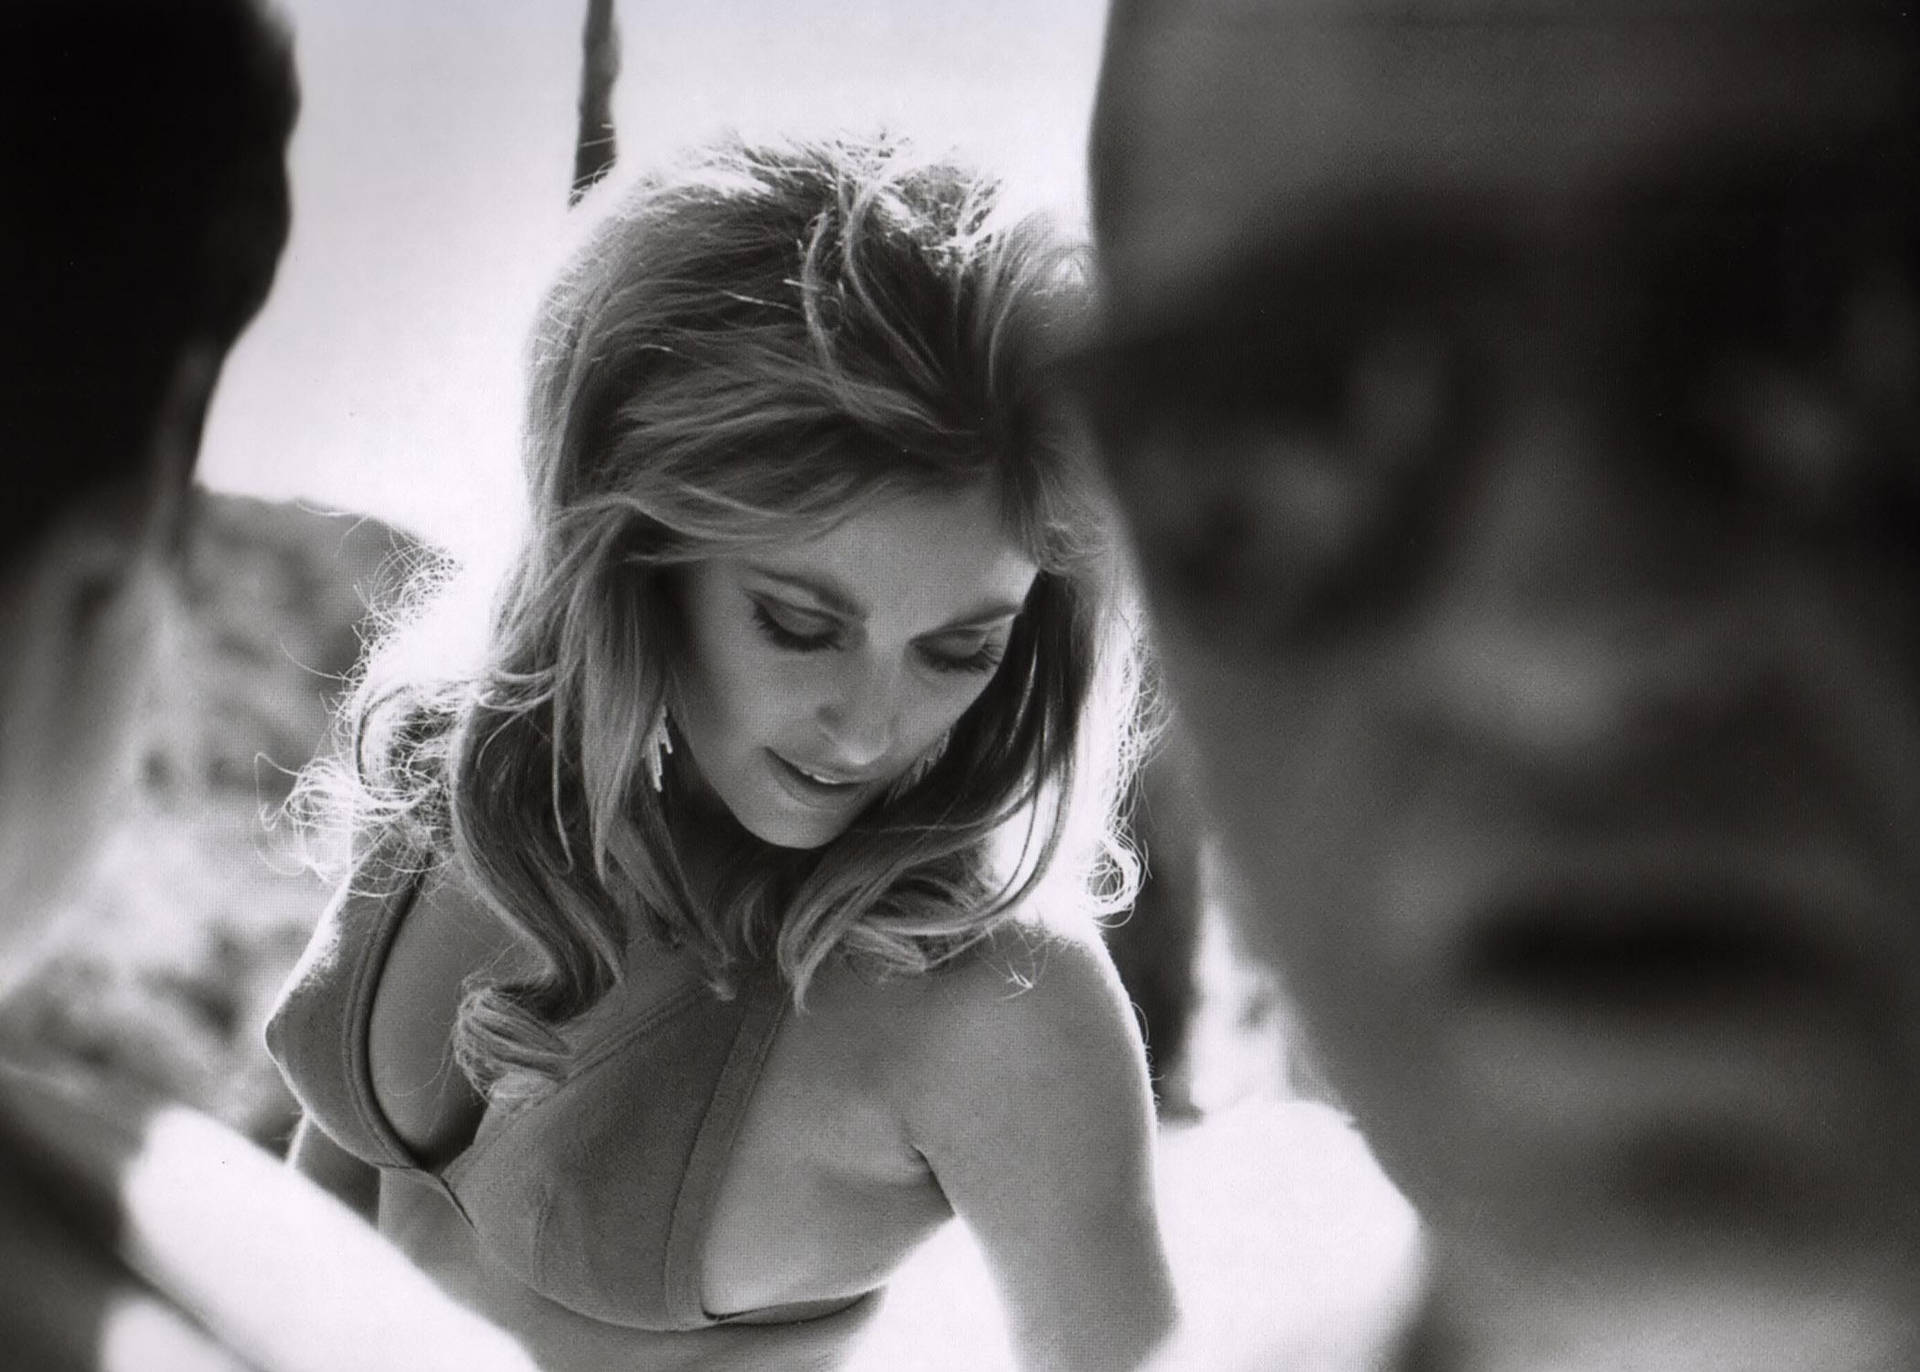 Sharon Tate - A Timeless Beauty From Hollywood's Golden Age